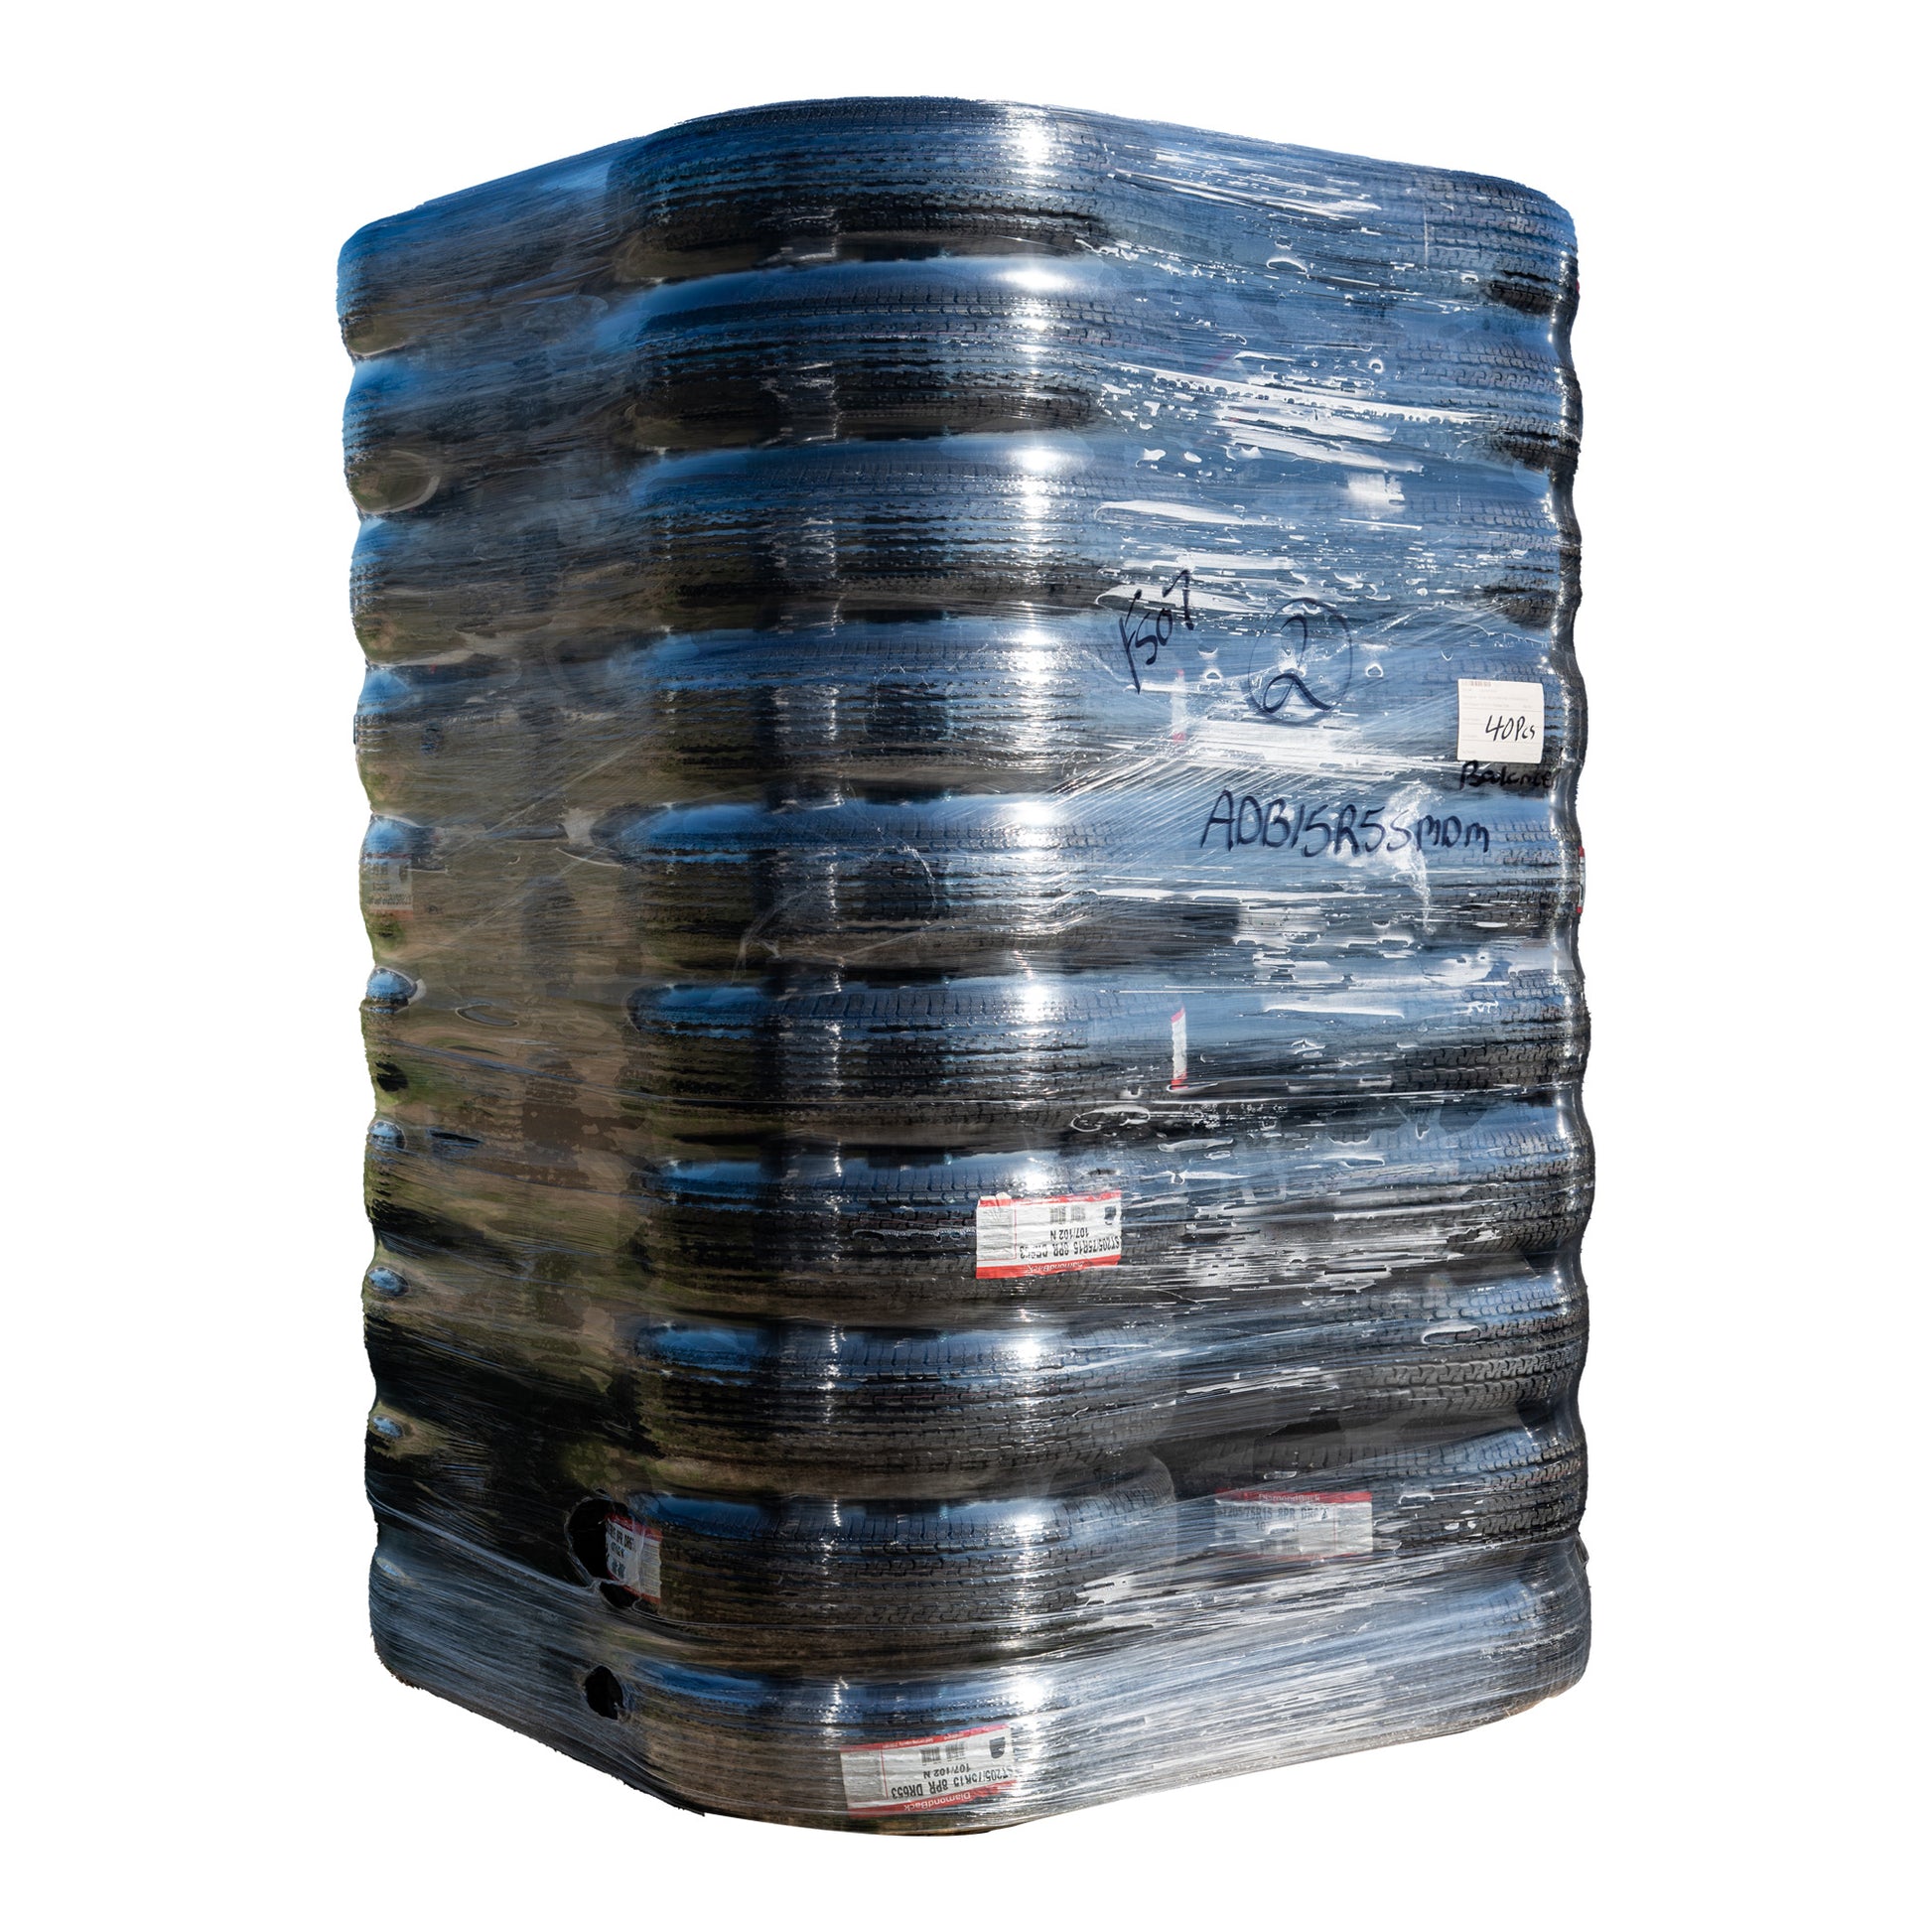 Pallet stacked with multiple Taskmaster 13" Radial Trailer Tires & Wheels, emphasizing the product's uniformity and consistent silver/gray finish. The stacked arrangement hints at bulk availability